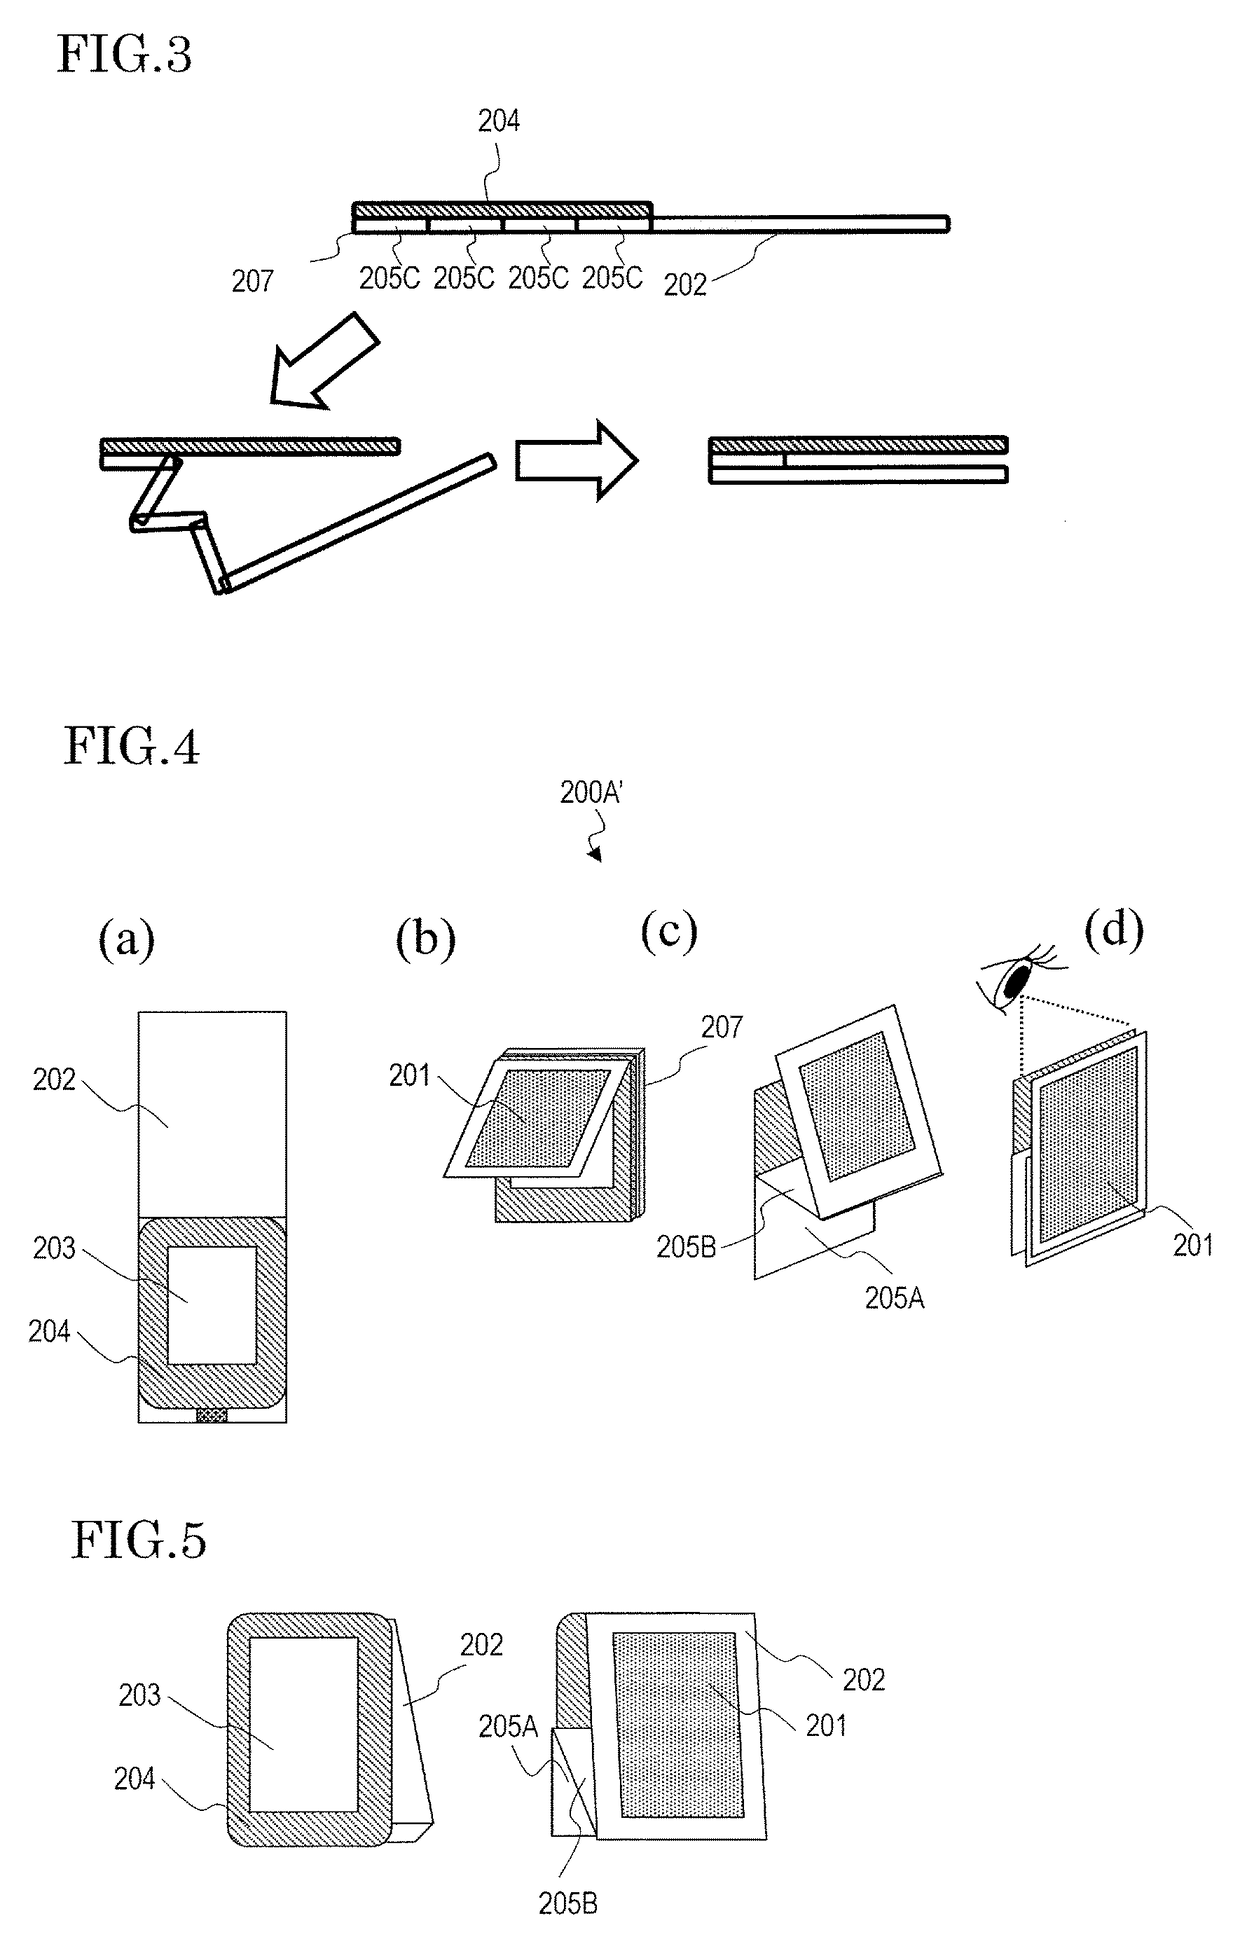 Case for mobile electronic device